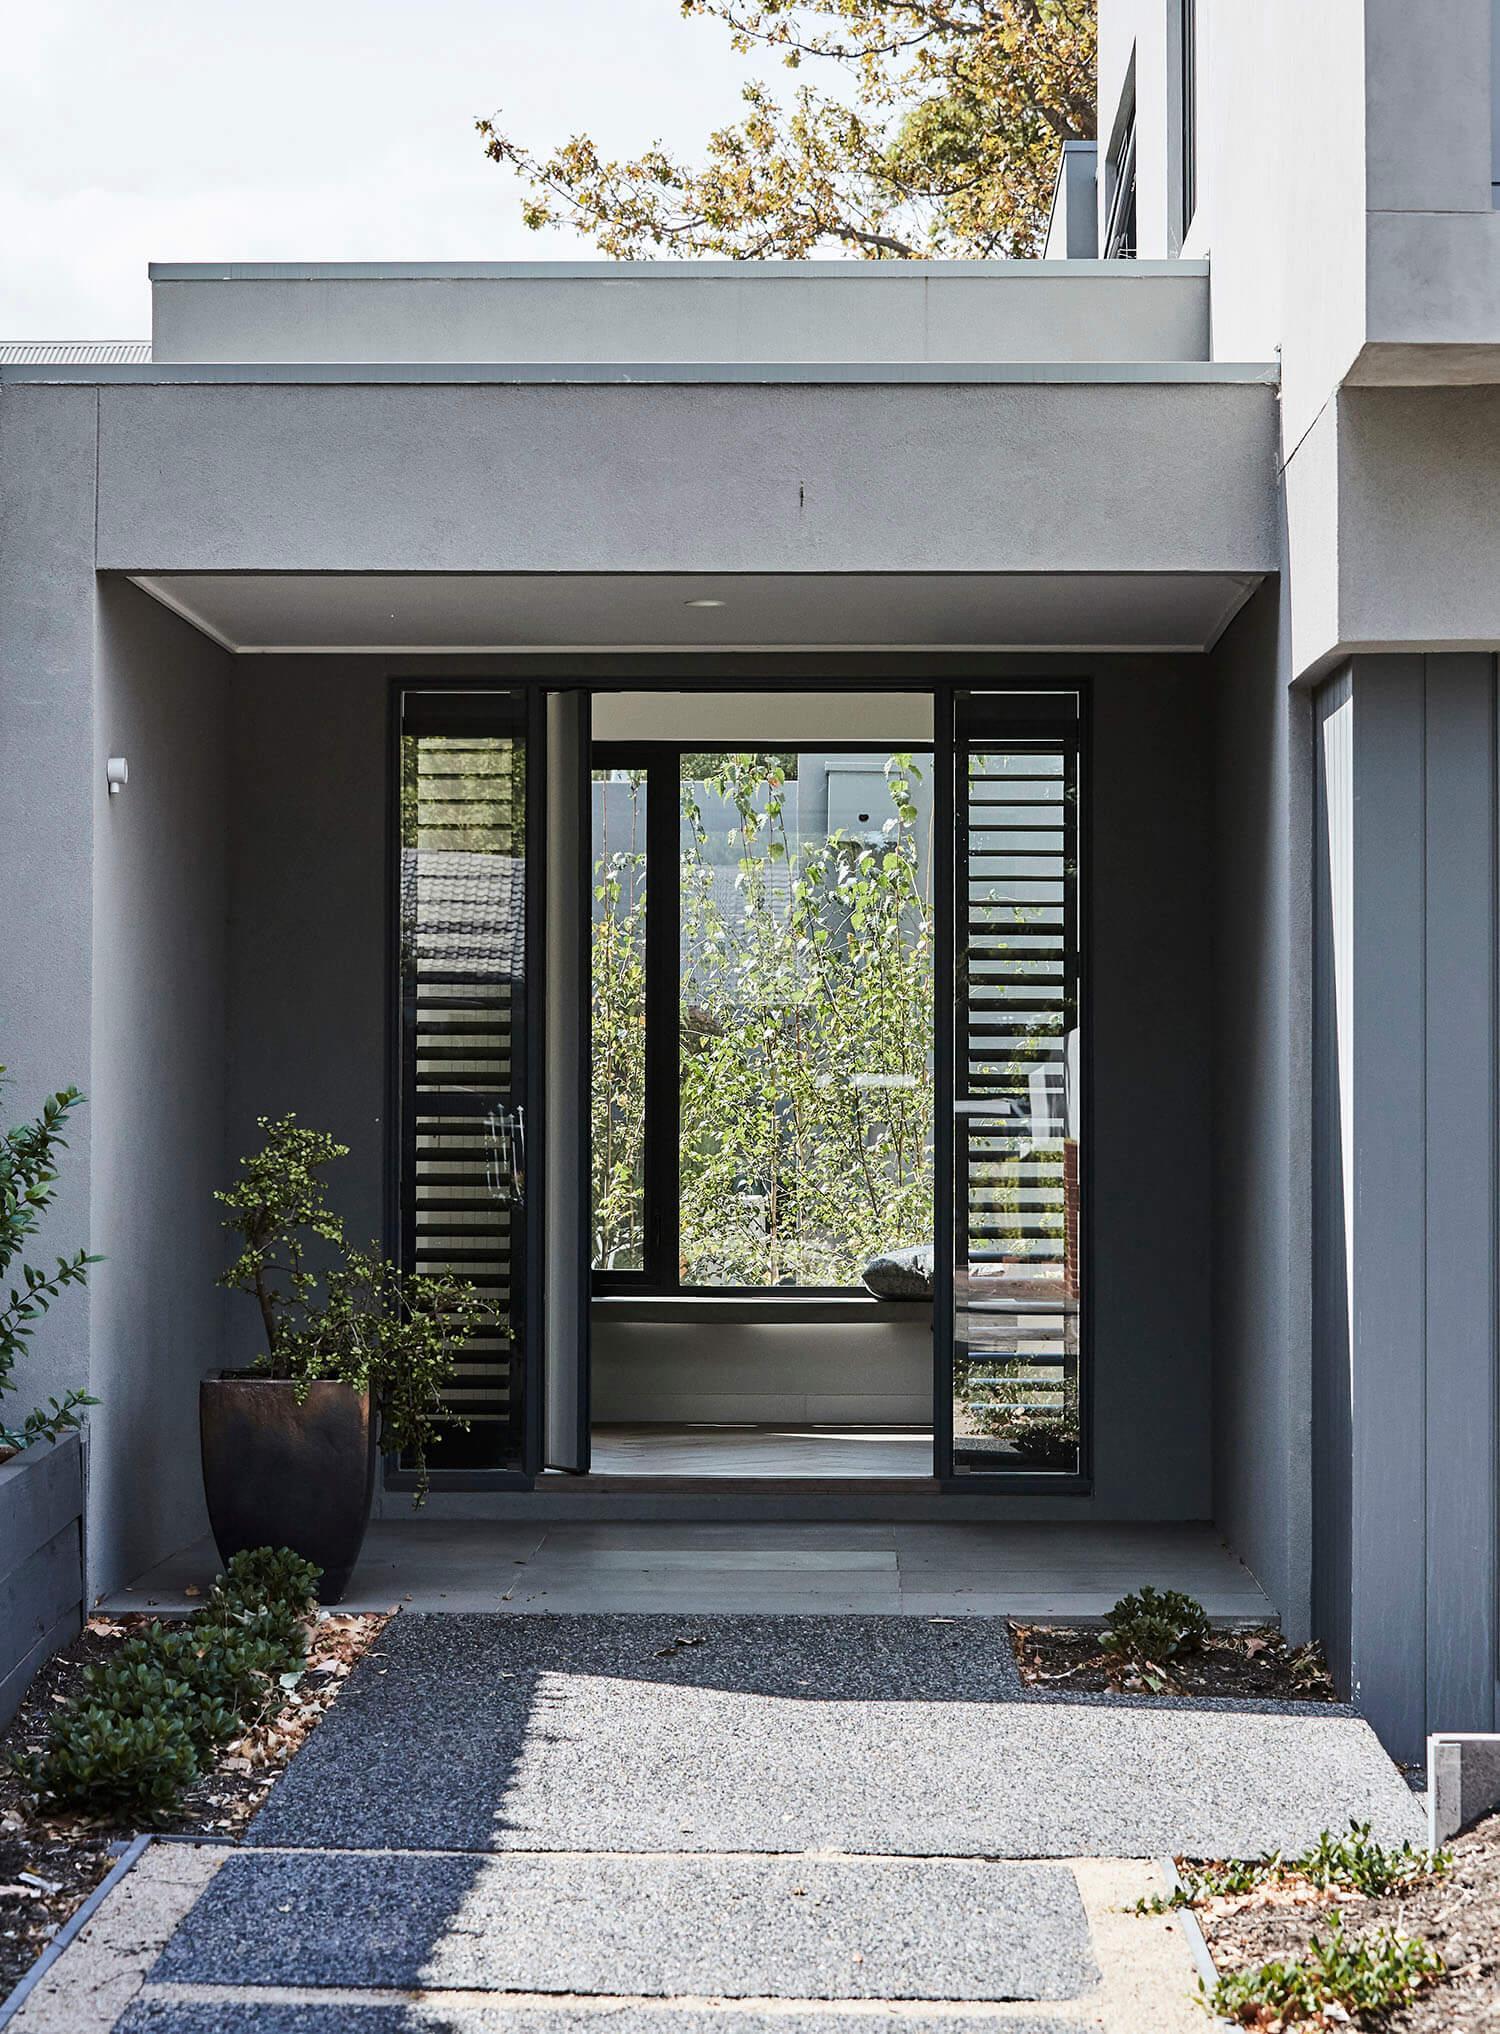 Contemporary house featuring a wide entrance and a sizable window.